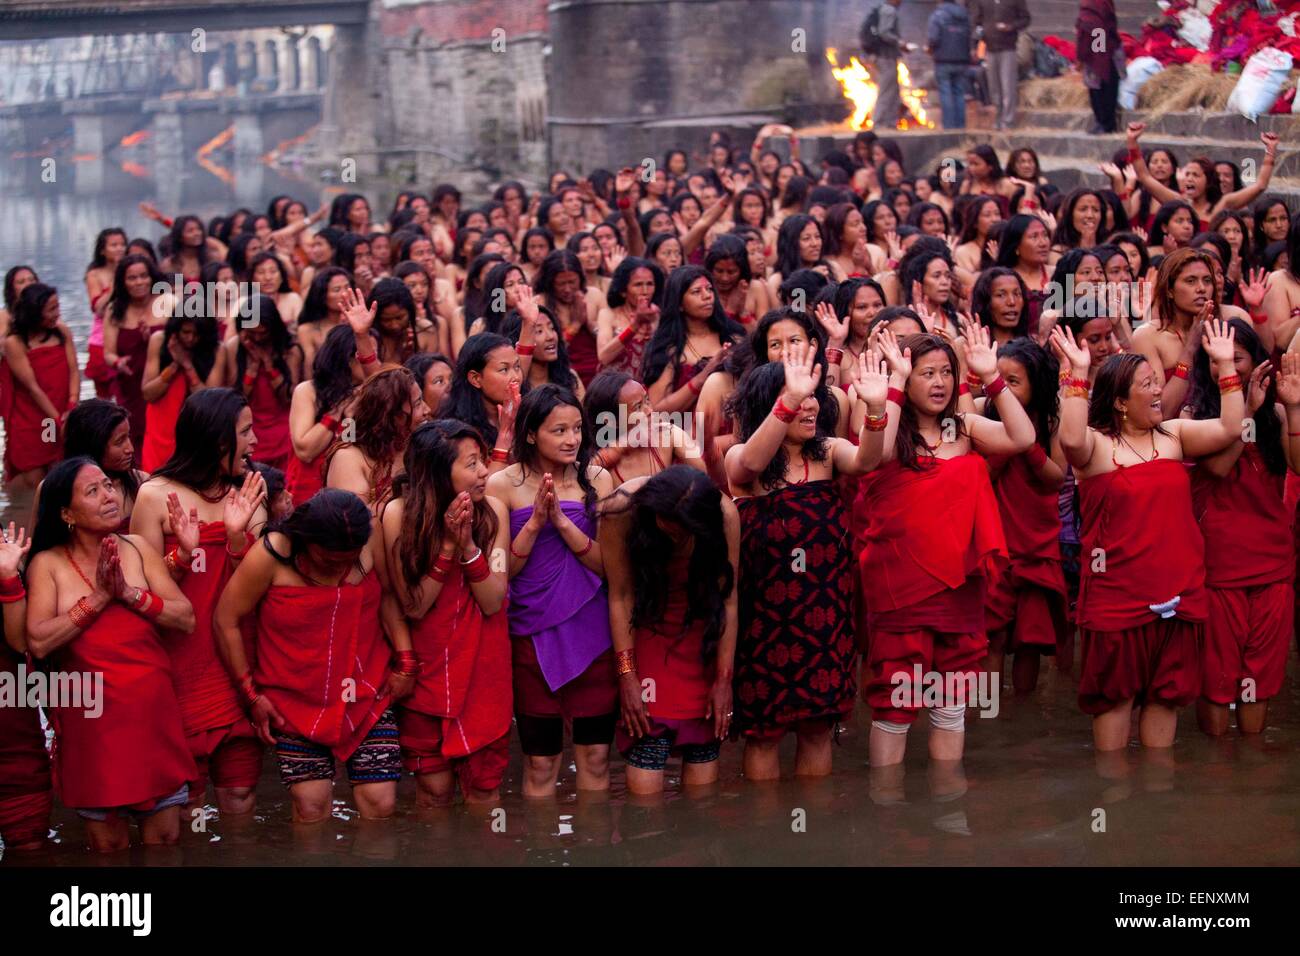 Kathmandu, Nepal. 20th Jan, 2015. Nepalese Hindu women devotees pray before taking a holy dip in the Bagmati River during the Madhav Narayan festival at Pashupatinath in Kathmandu, Nepal, Jan. 20, 2015. Nepalese Hindu women observe a fast and pray to Goddess Swasthani for longevity of their husbands and family prosperity during the month-long festival. © Pratap Thapa/Xinhua/Alamy Live News Stock Photo